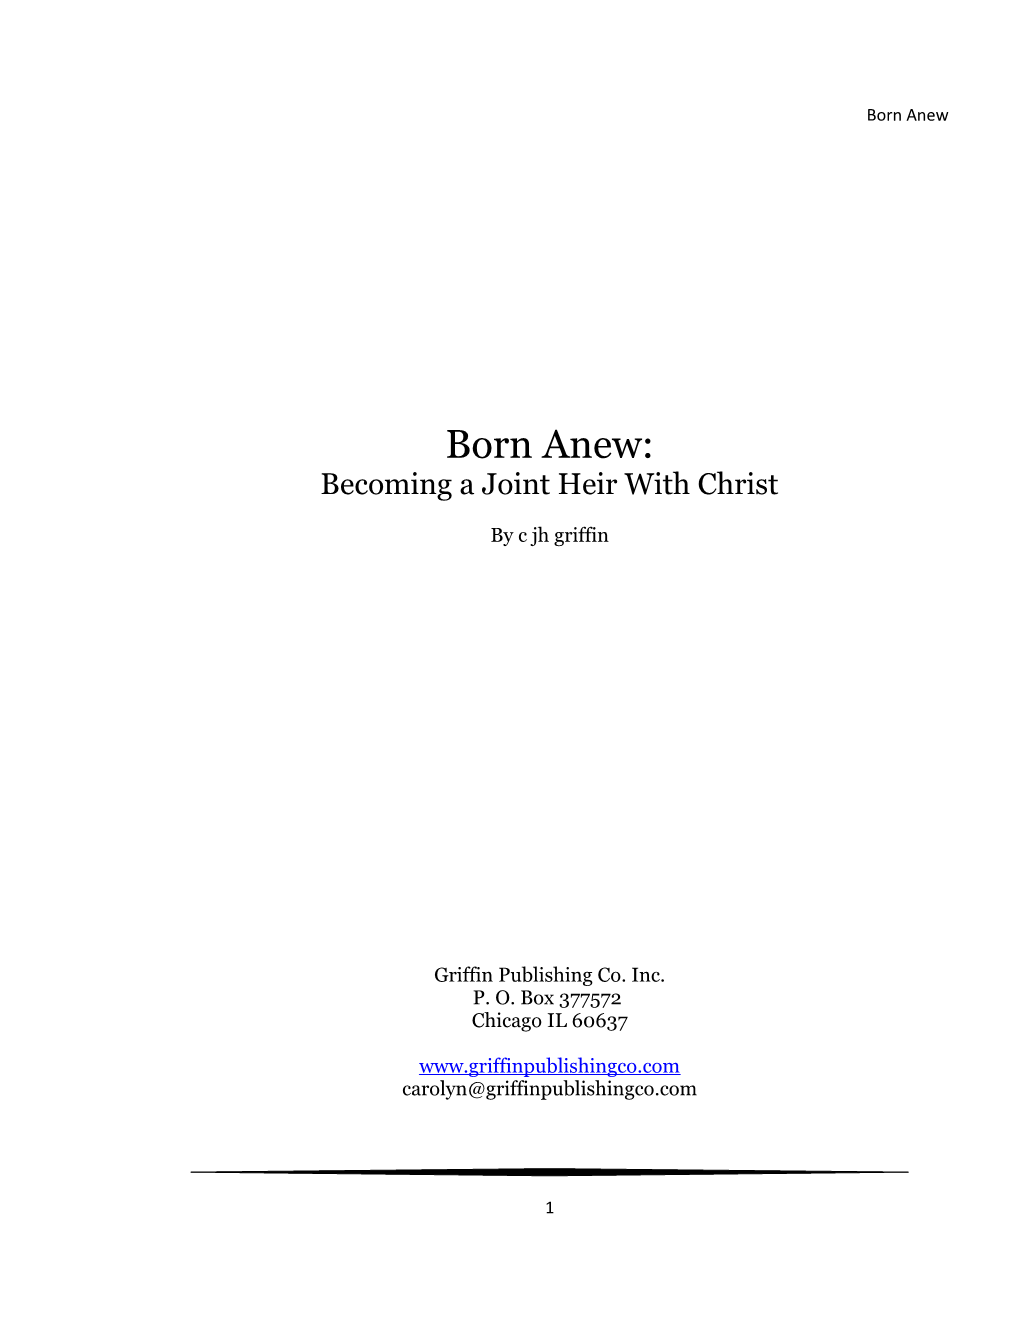 Becoming a Joint Heir with Christ